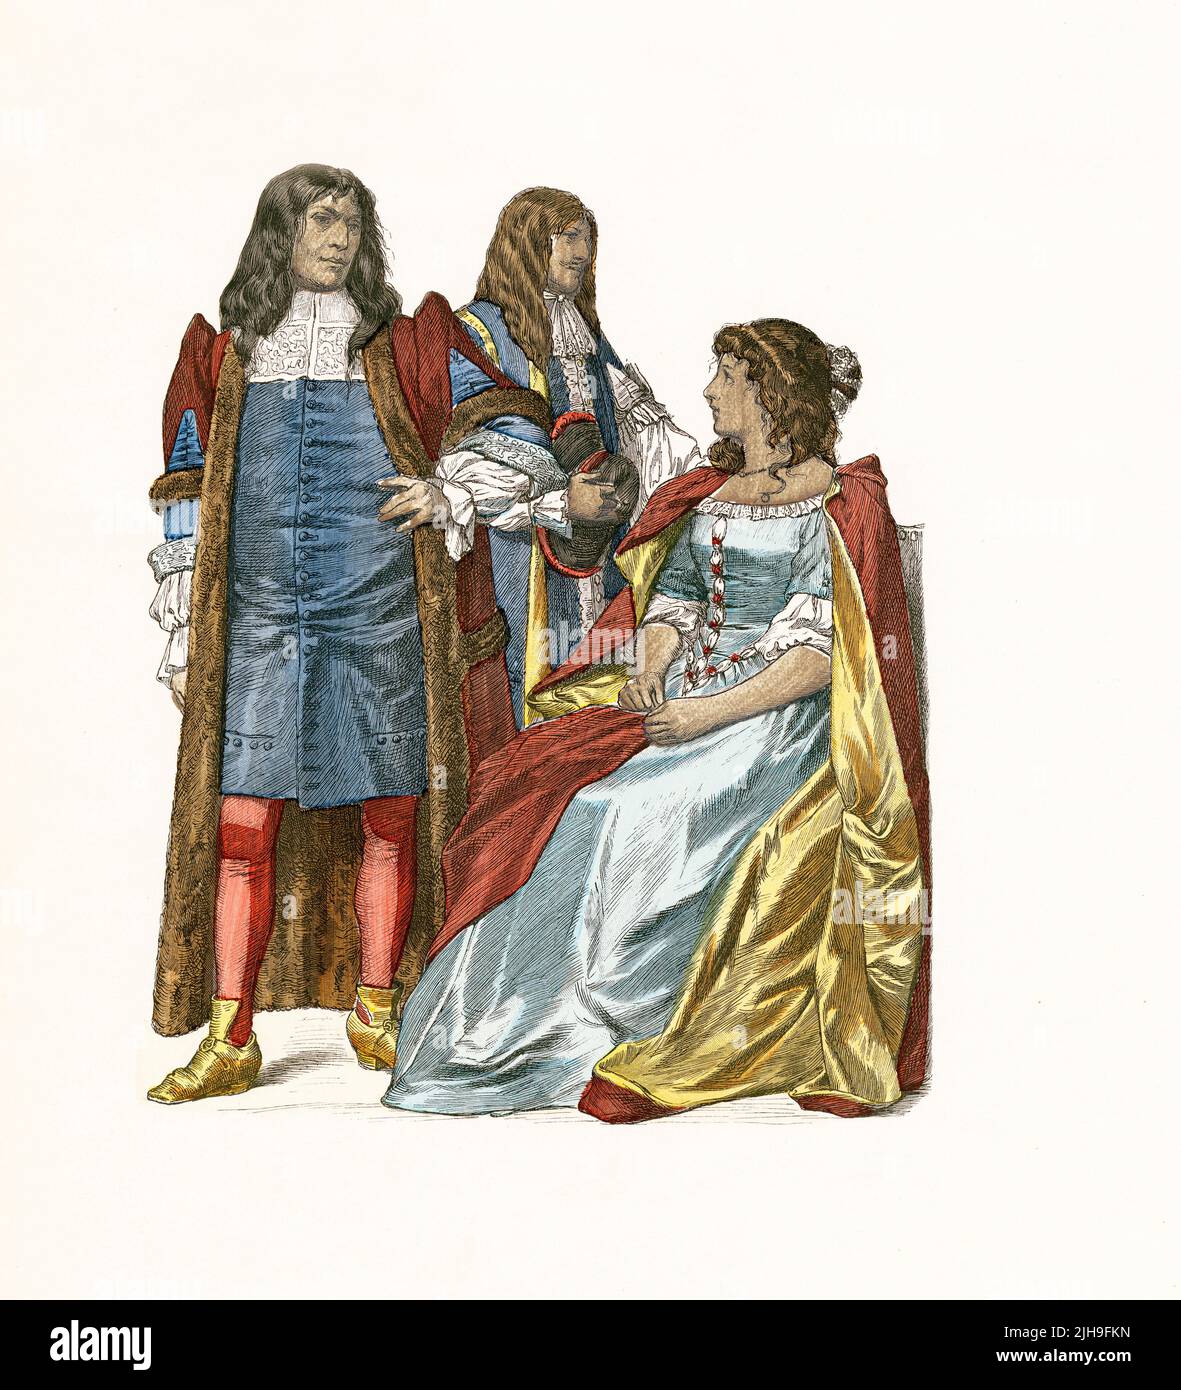 Slingsby Bethel, Sheriff of London (1680), Cavalier of Charles II (1680), Duchess of Cleveland (1675), England, Illustration, The History of Costume, Braun & Schneider, Munich, Germany, 1861-1880 Stock Photo